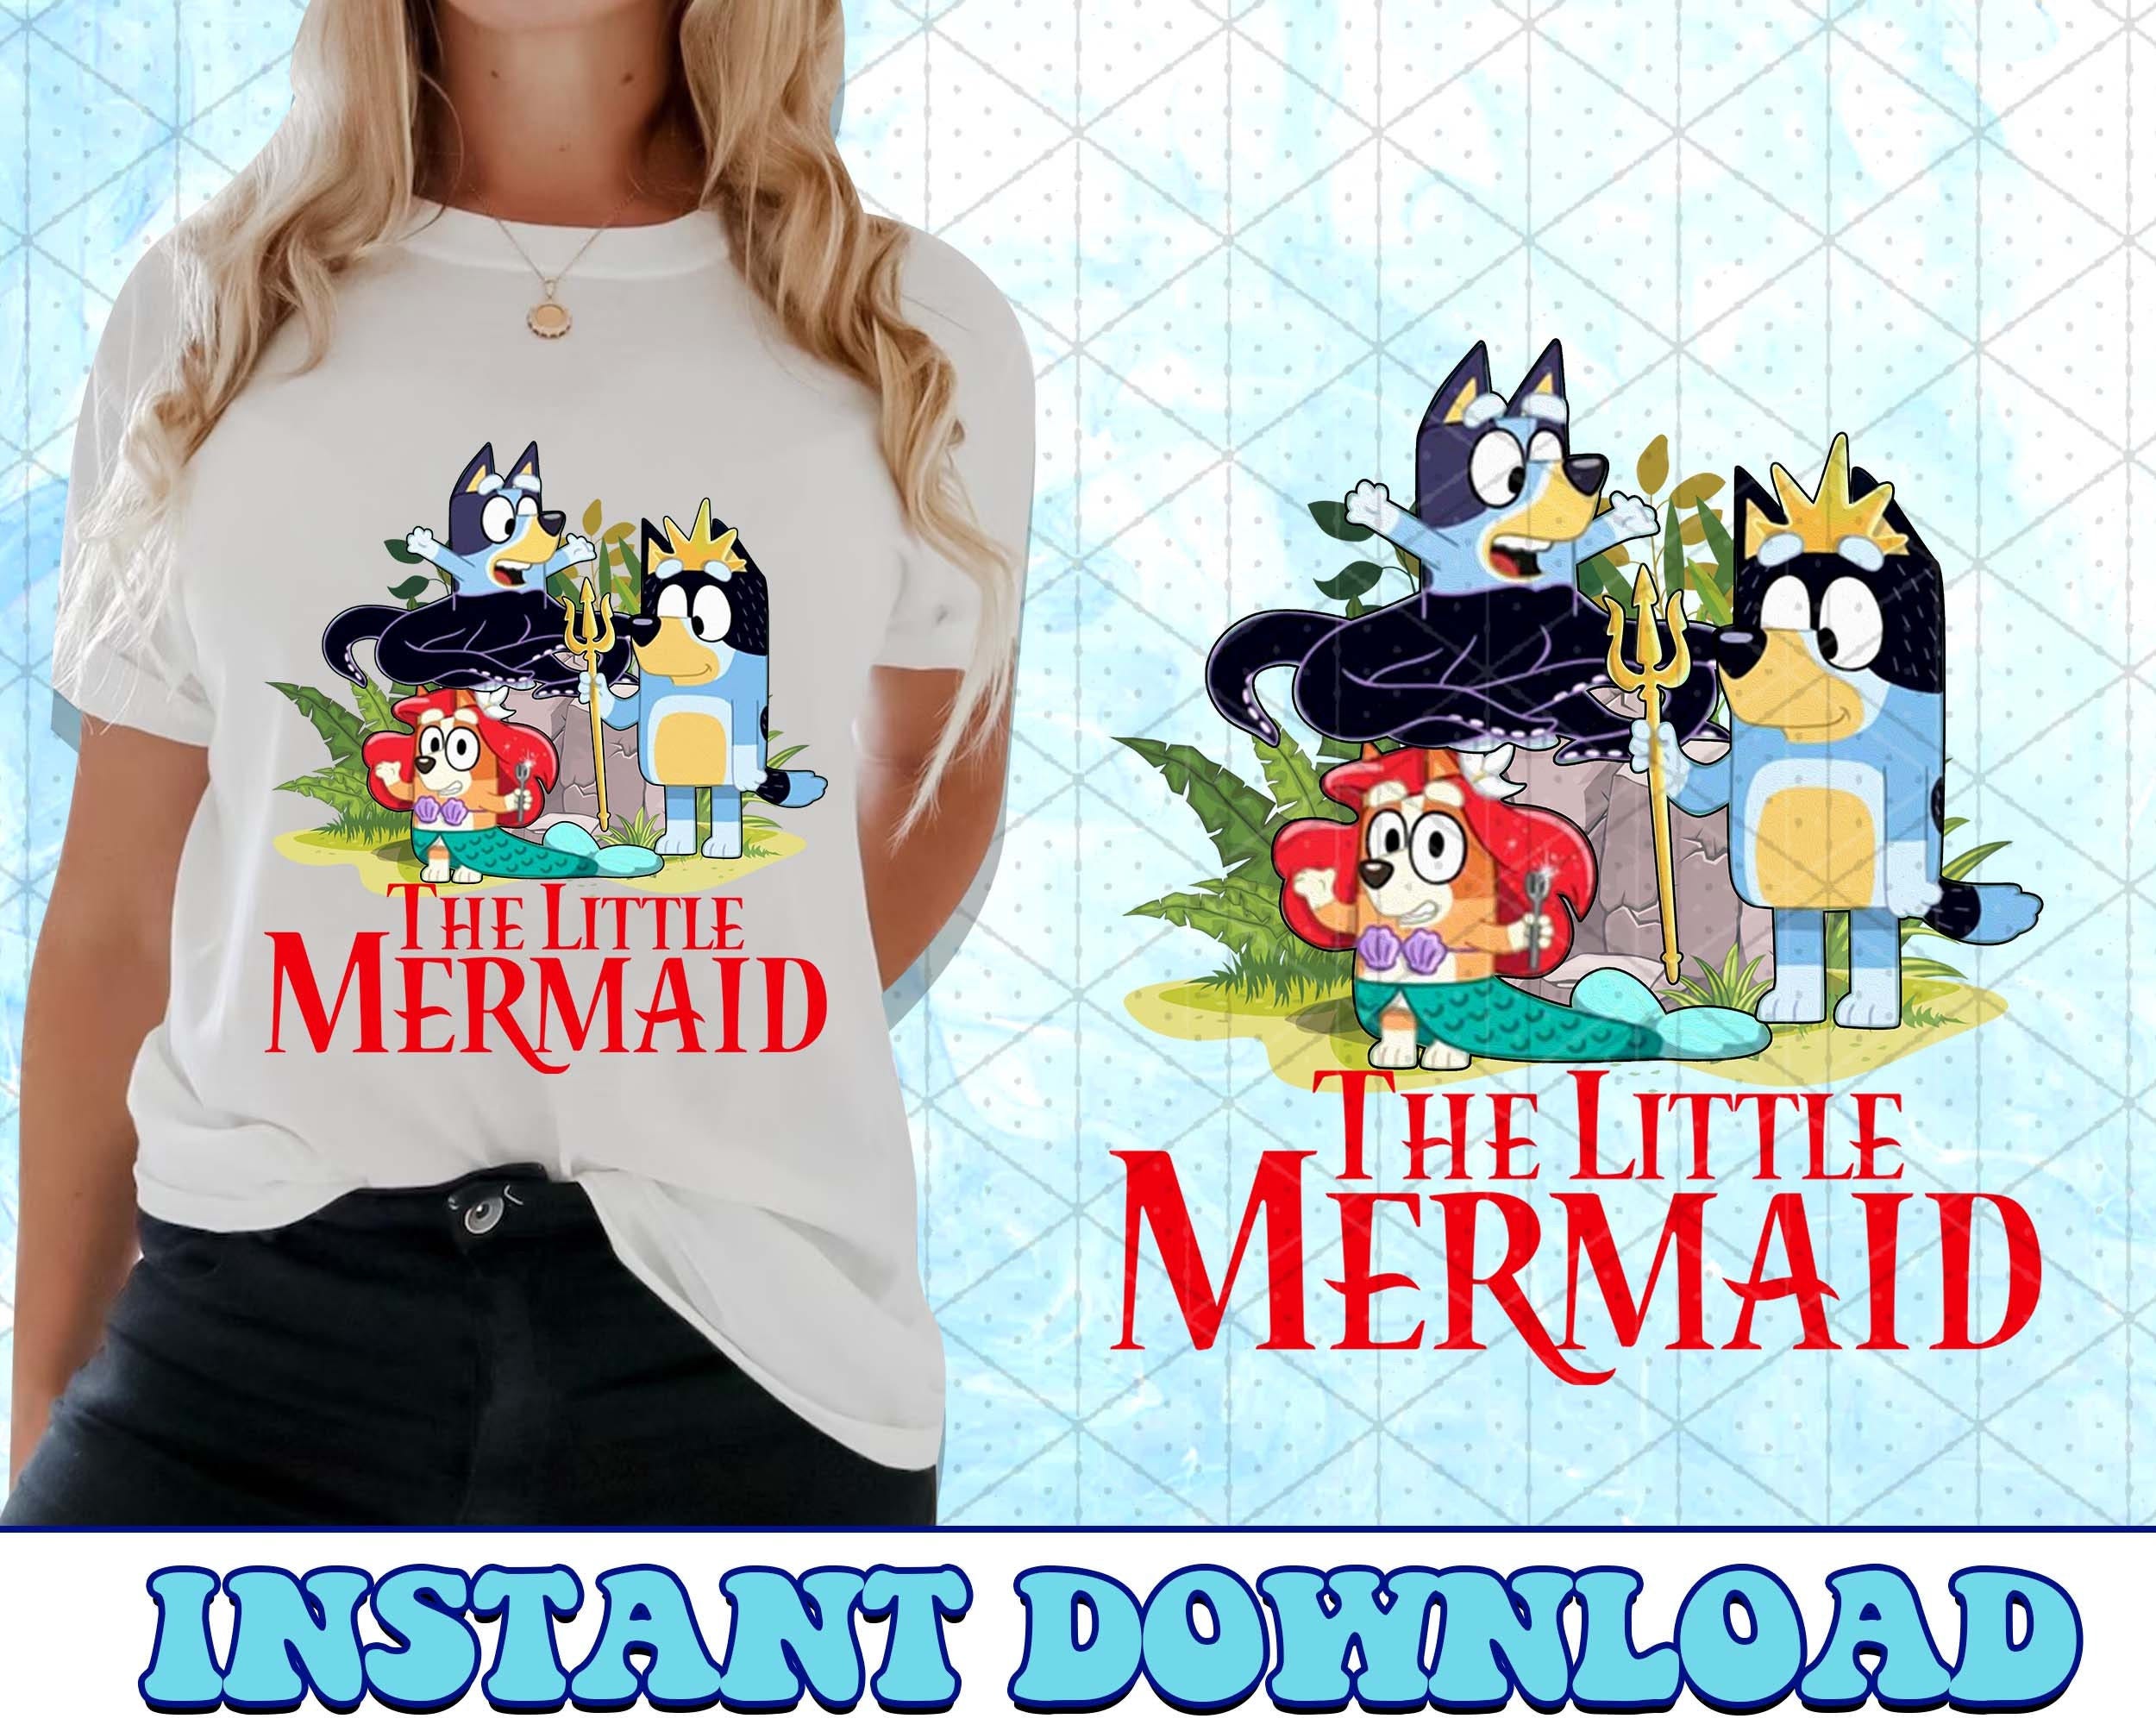 The little Mermaid Bluey PNG, Bluey Family PNG, Bluey Back to School Png, Bluey Bingo Png, Bluey Friends Png, Bluey Bingo PNG